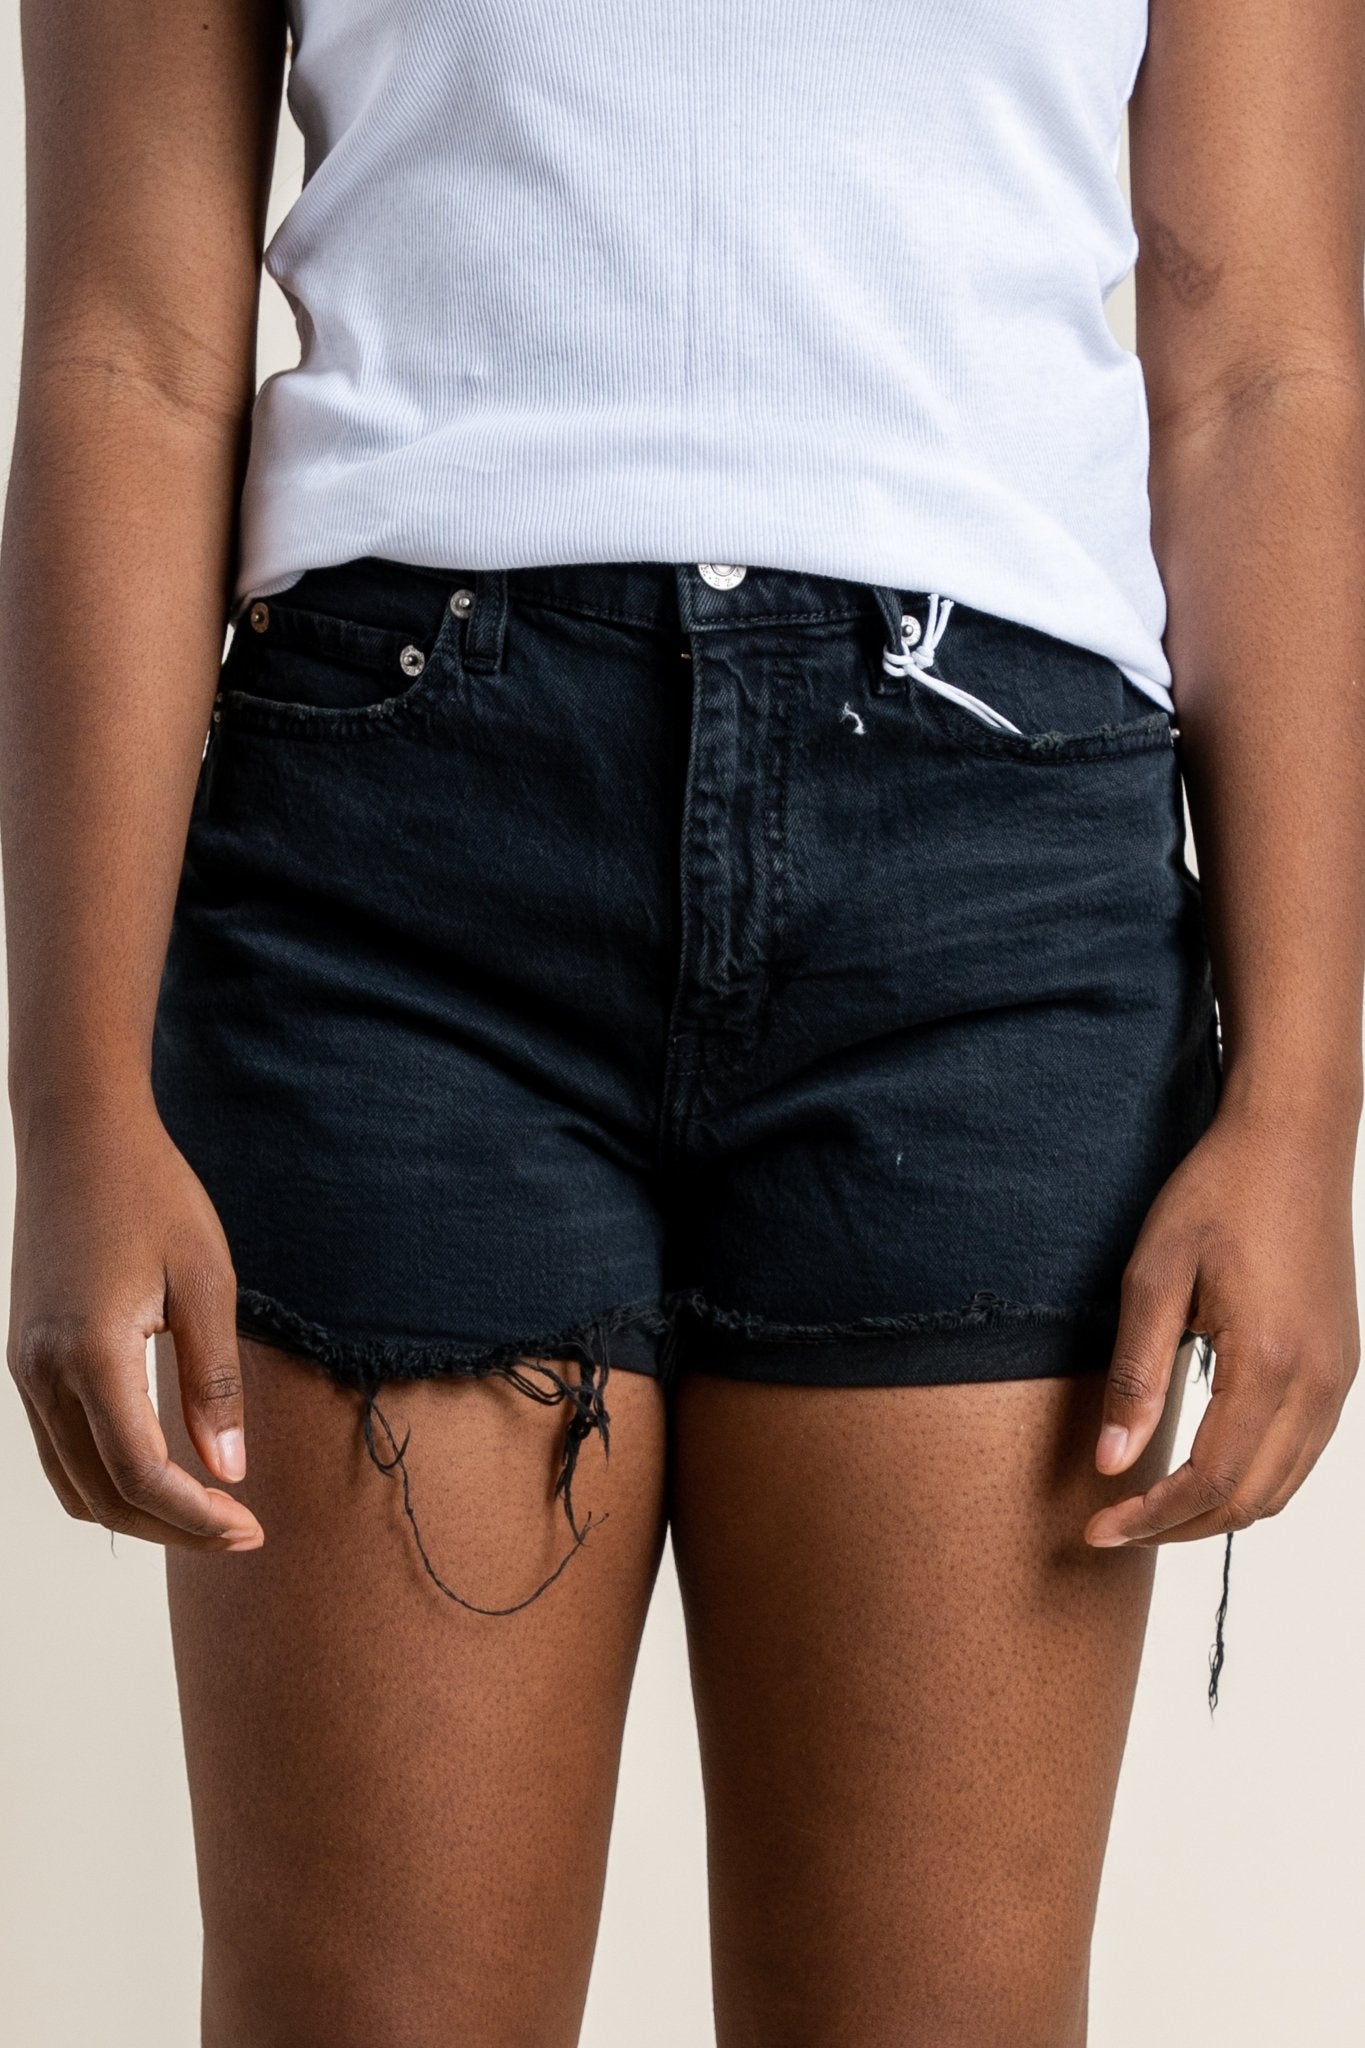 Daze troublemaker high rise shorts backseat - Trendy Shorts - Cute Vacation Collection at Lush Fashion Lounge Boutique in Oklahoma City